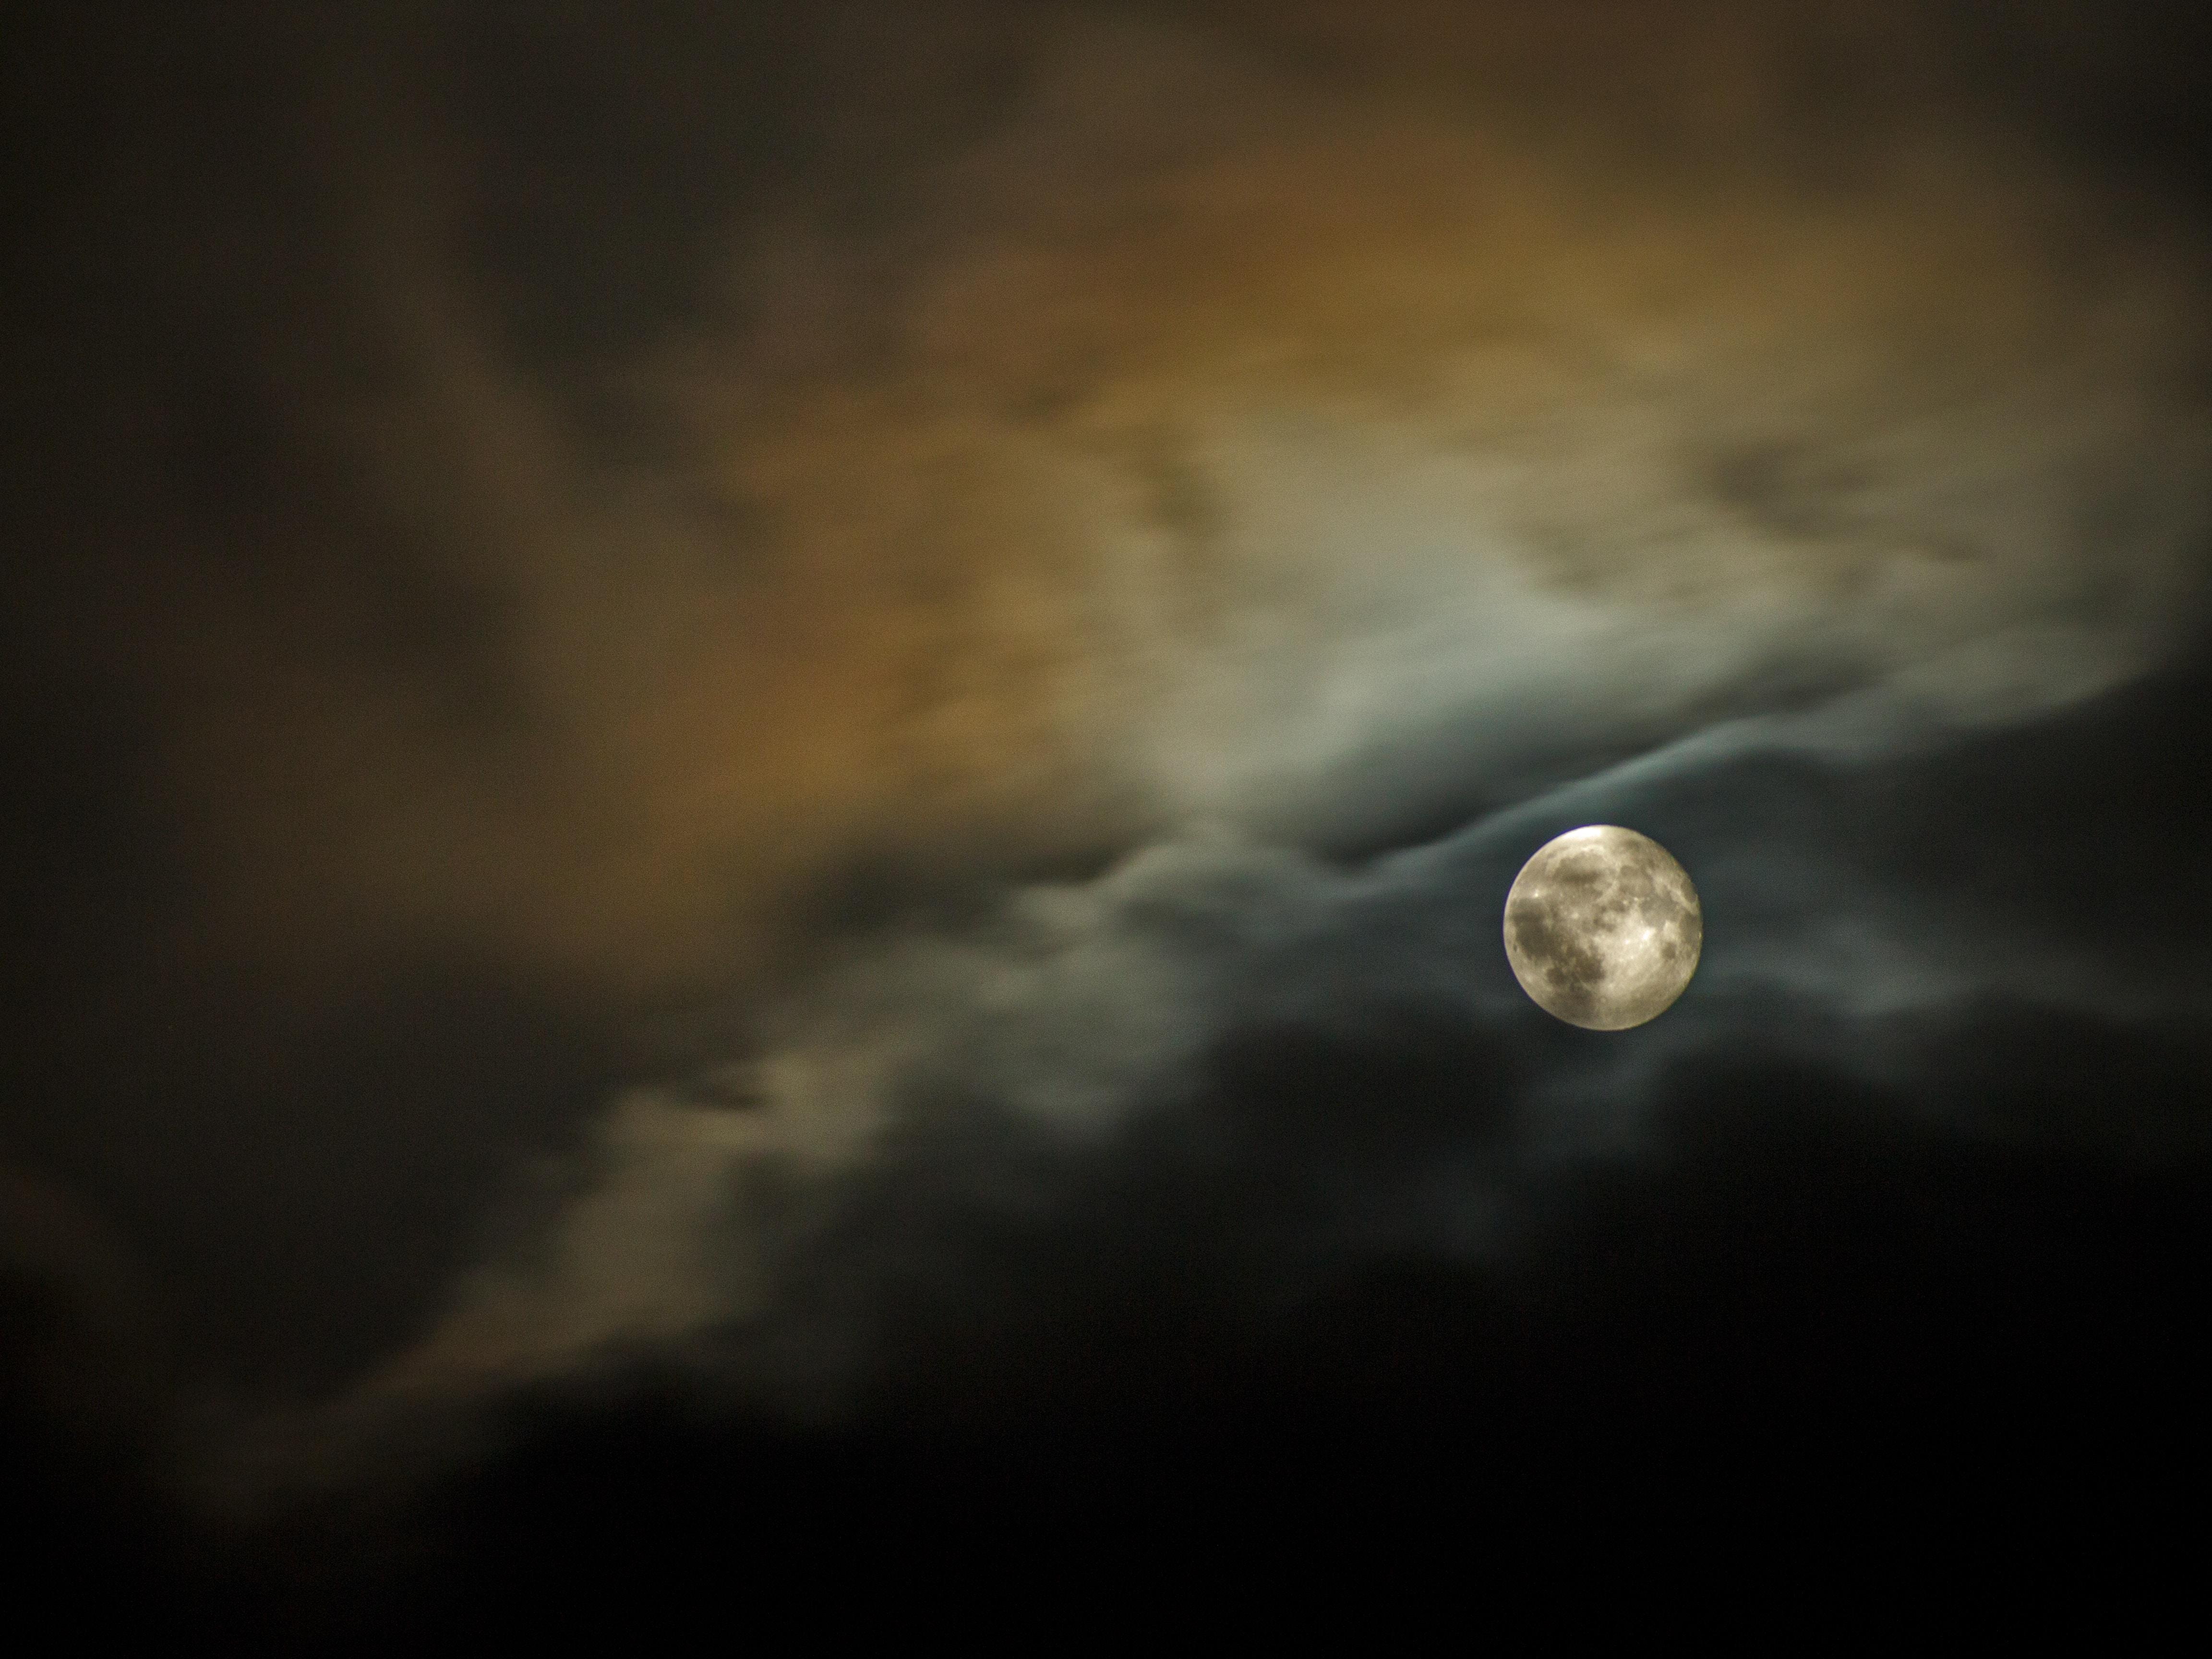 4608x3456 #moonlight, #Free image, #space background